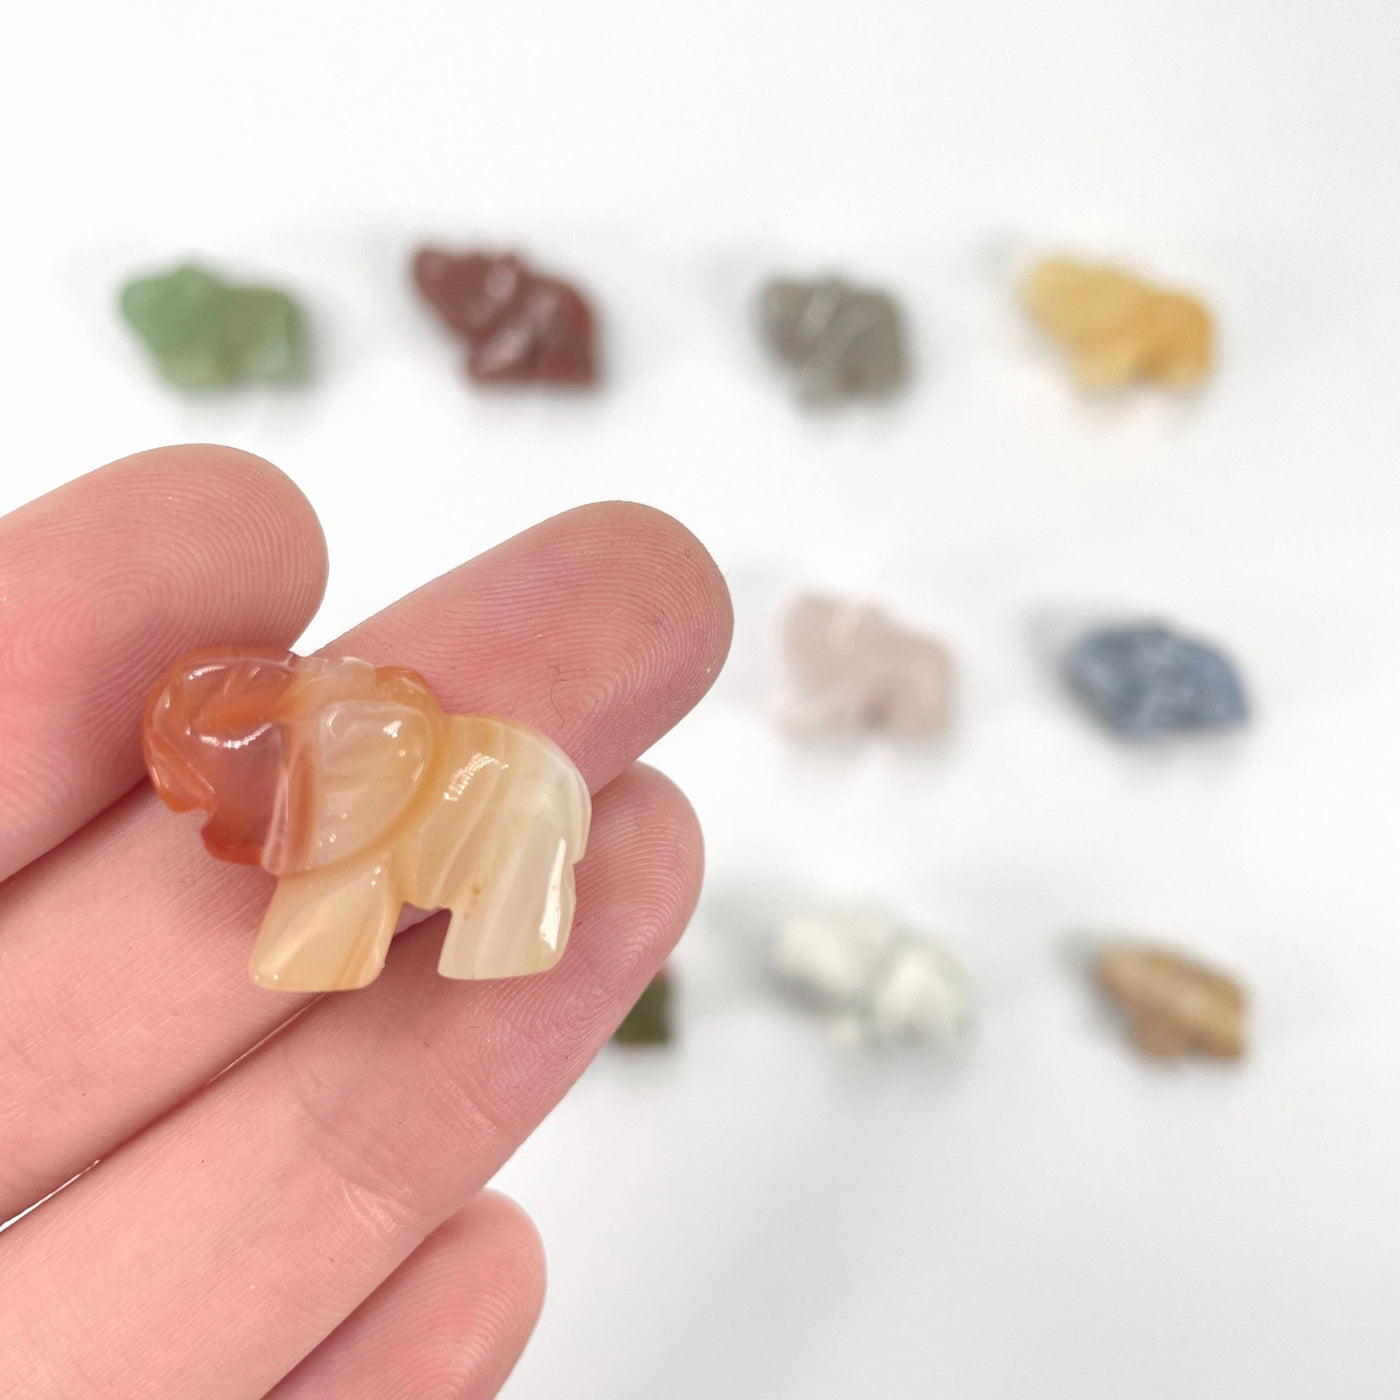 all gemstone elephant options in hand or on display